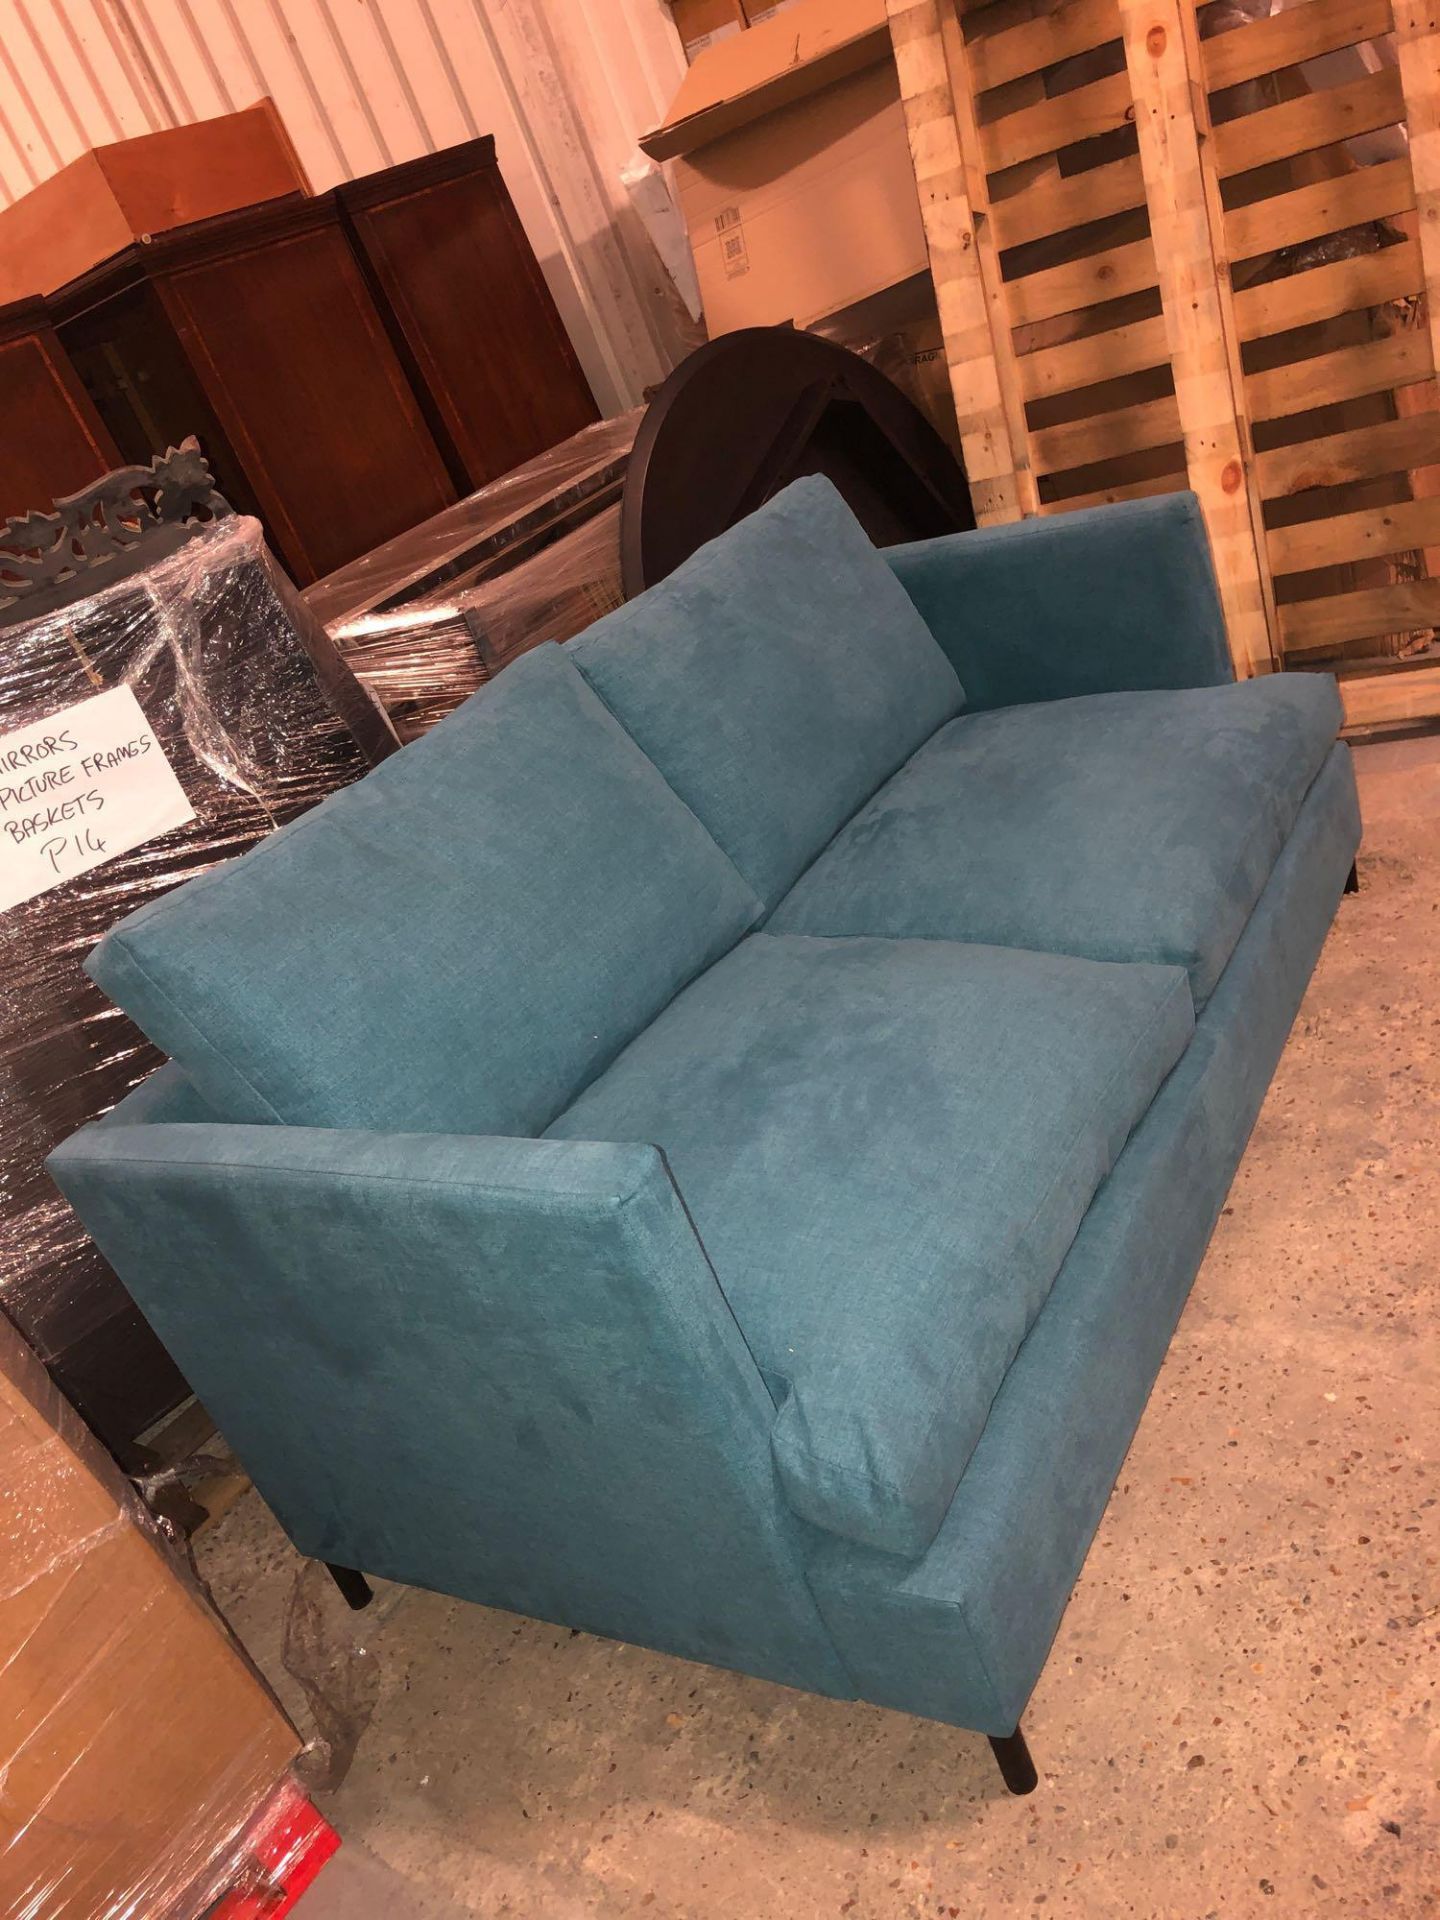 Weyburn 3 Seater Sofa Bed Turquoise The Weyburn 3 Seater Sofabed Is A Both Versatile And Stylish